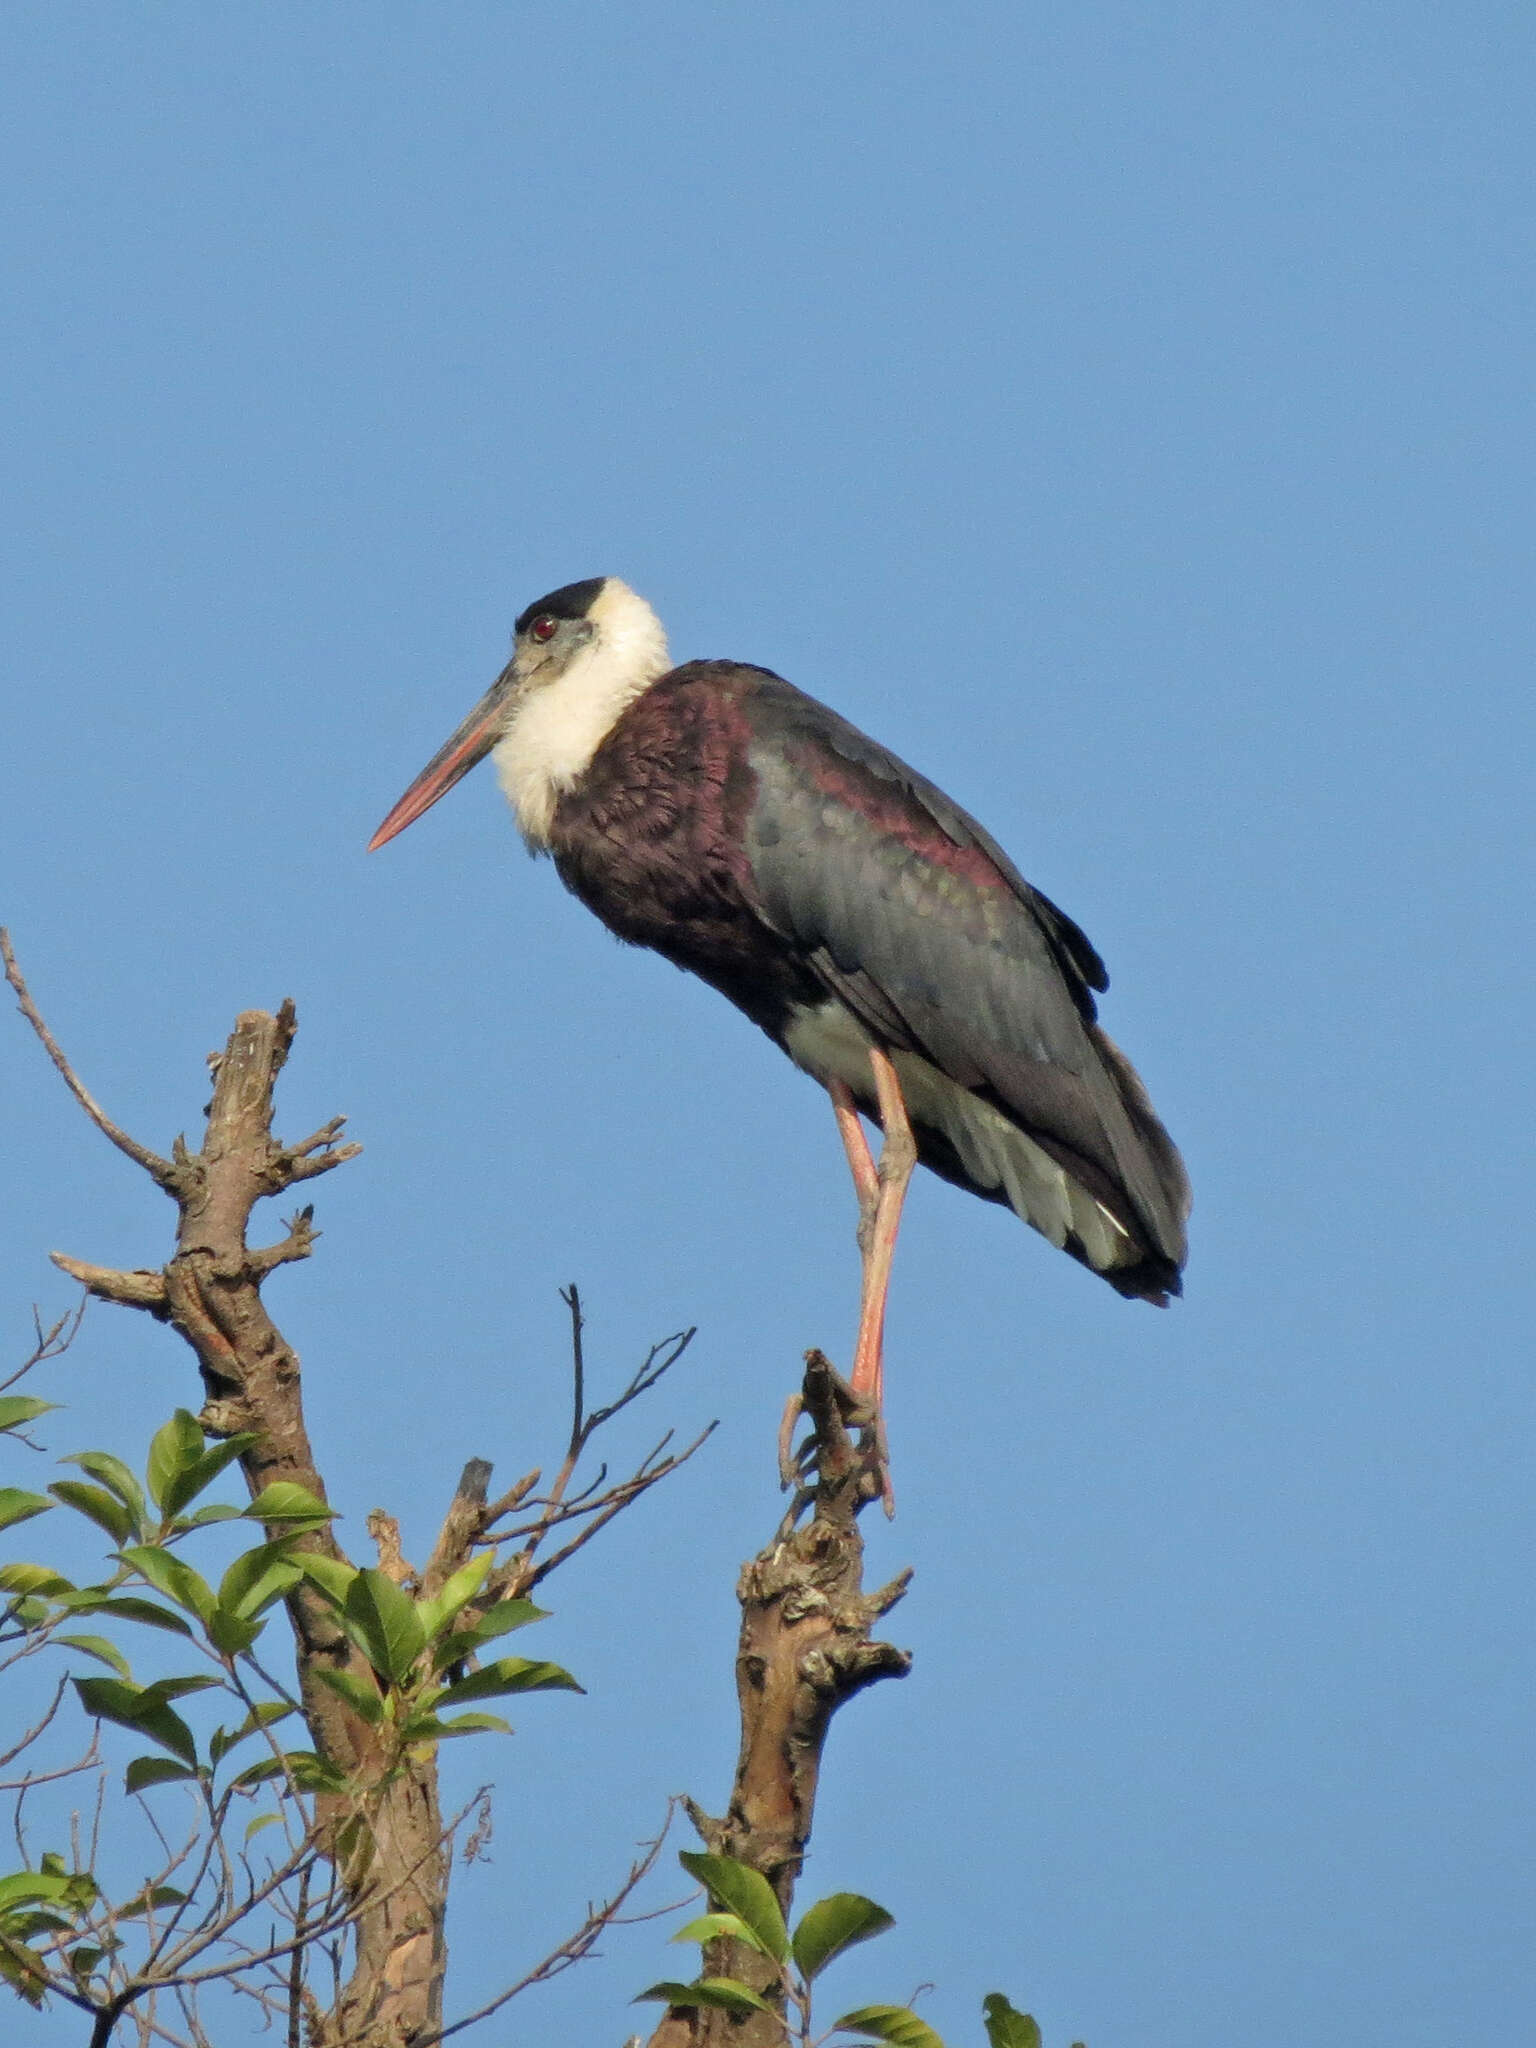 Image of Asian Woolly-necked Stork